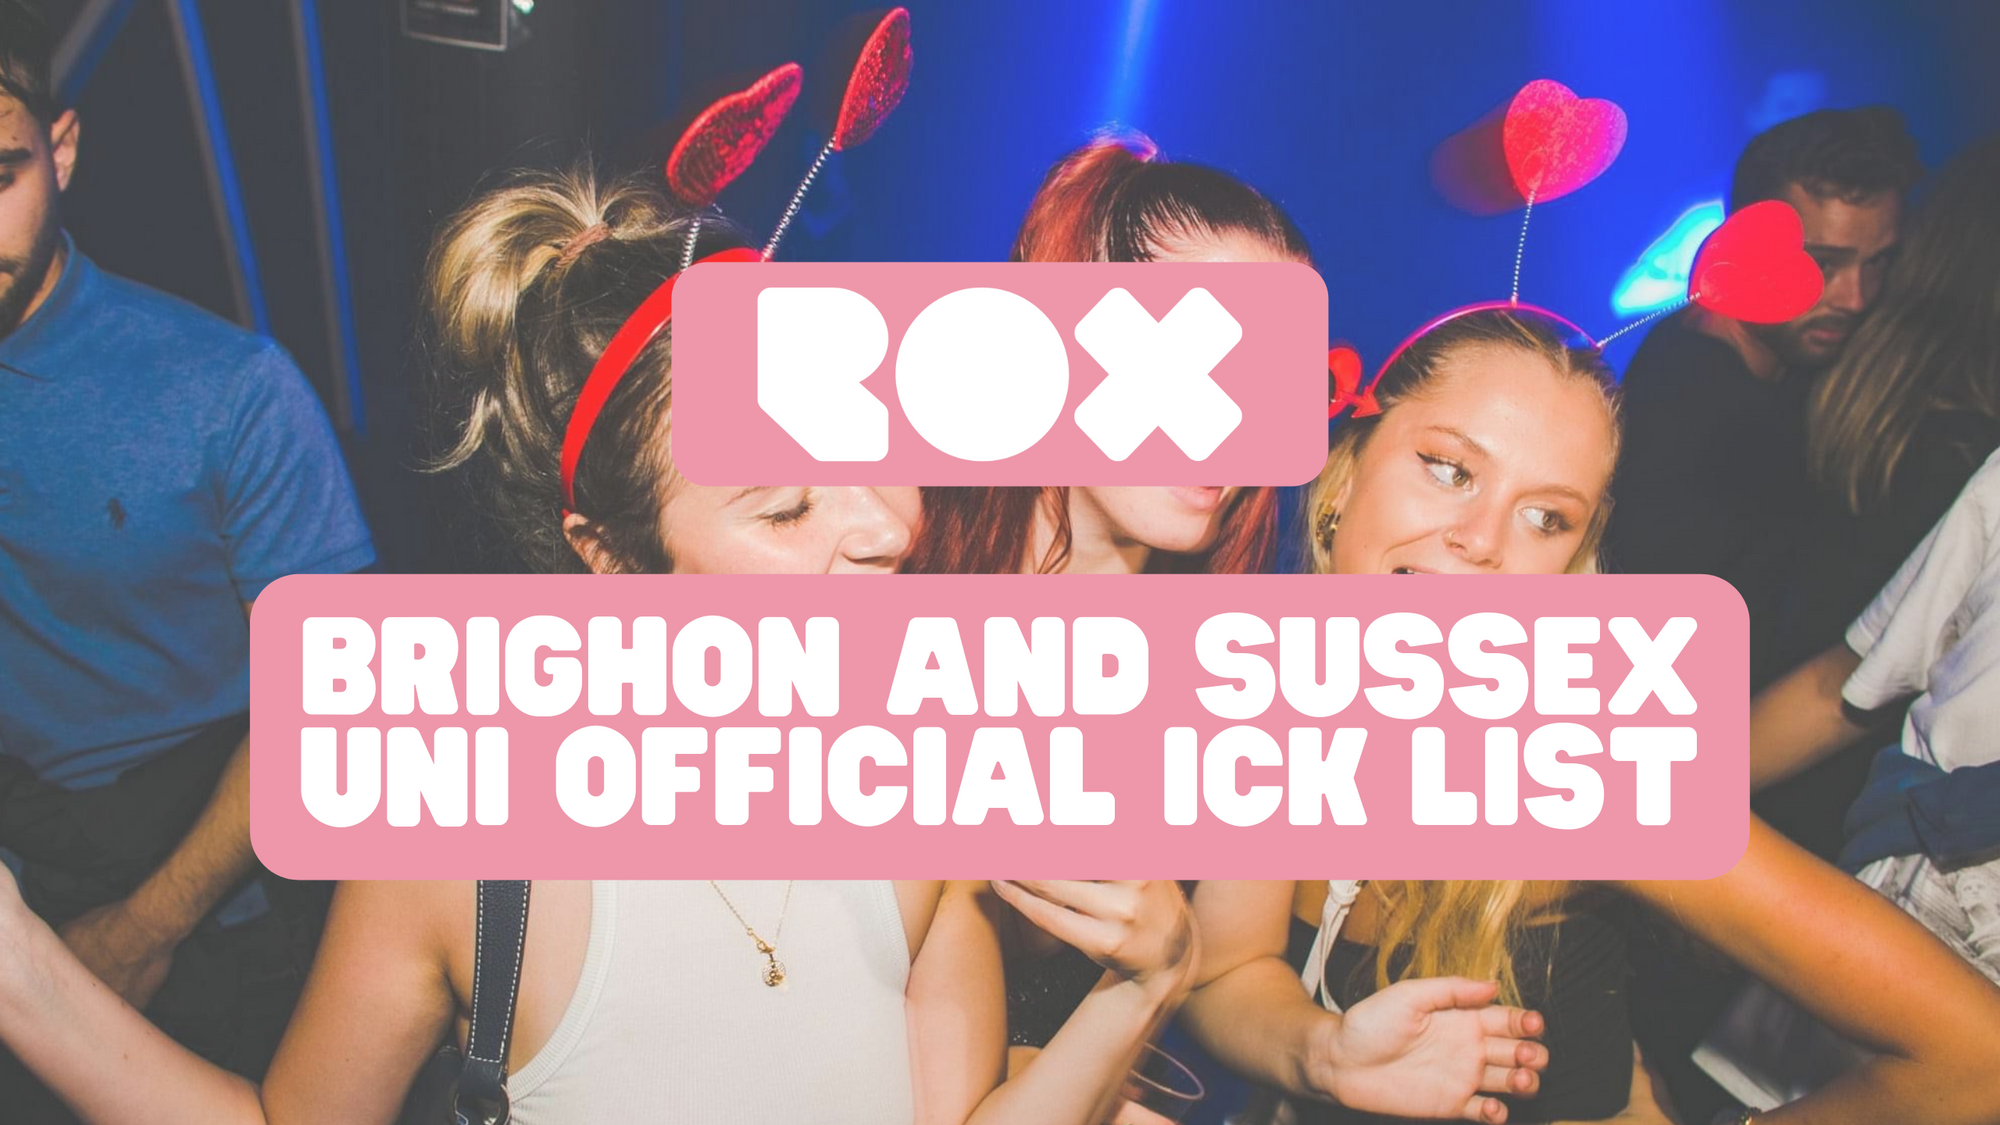 The Official Brighton and Sussex University Ick List